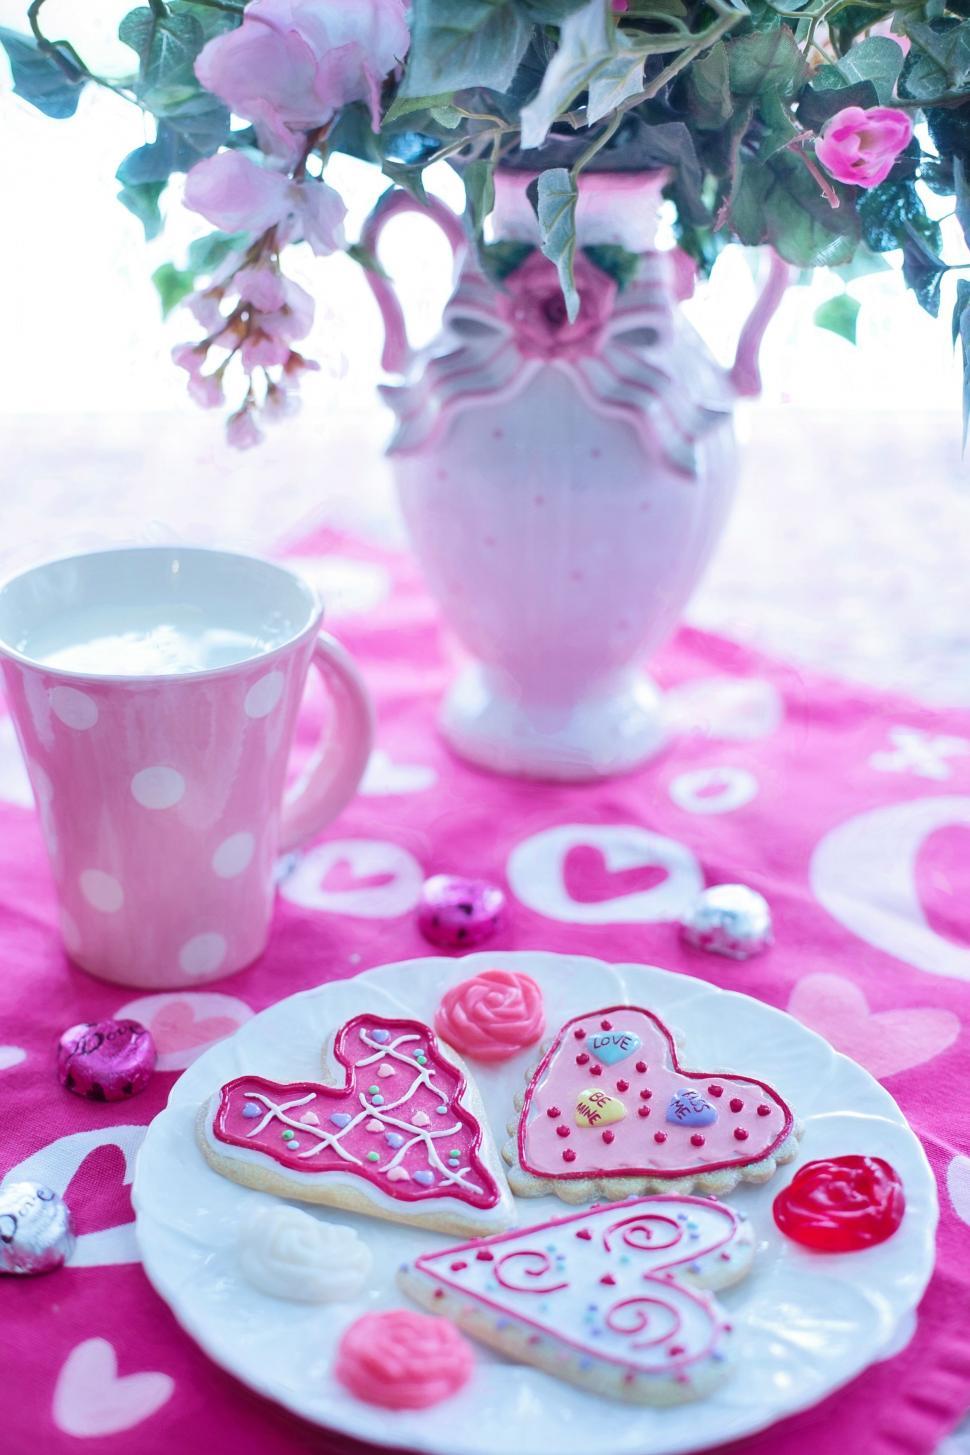 Free Image of Valentine cookies and Coffee  